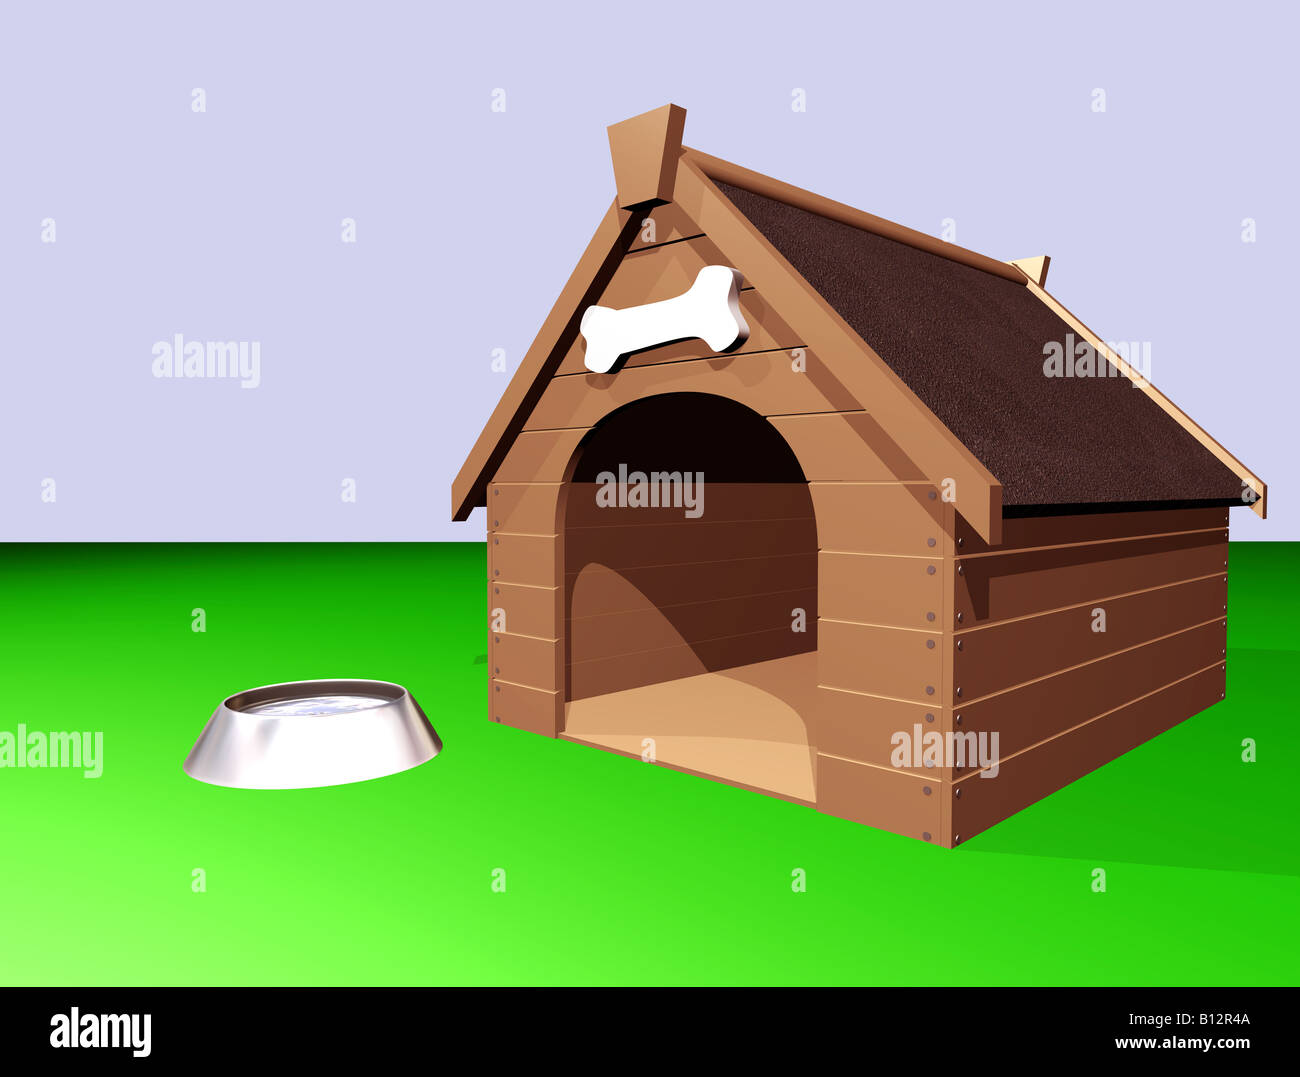 3D illustration of a large wooden doghouse or kennel with a bowl of water Stock Photo